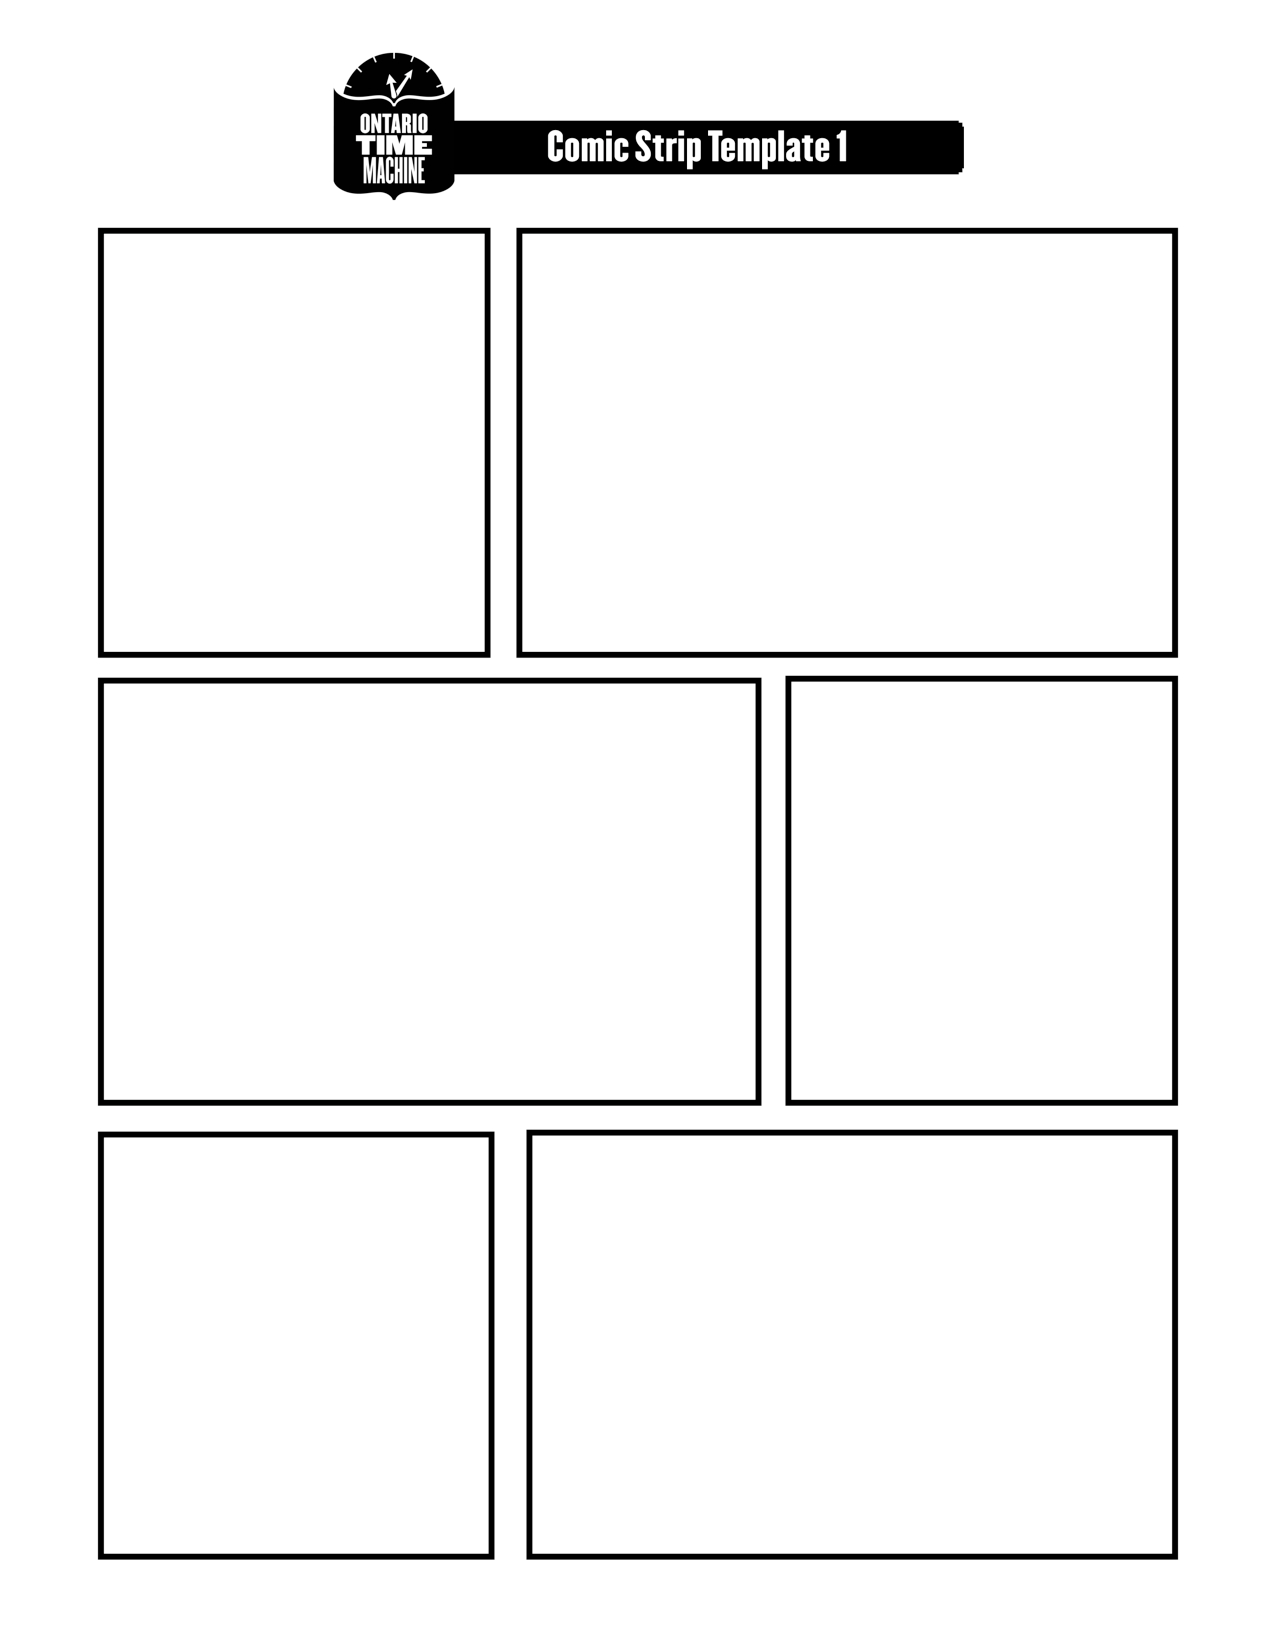 Cartooning Blanks Here Are A Few Ideas For You On Working On In Printable Blank Comic Strip Template For Kids